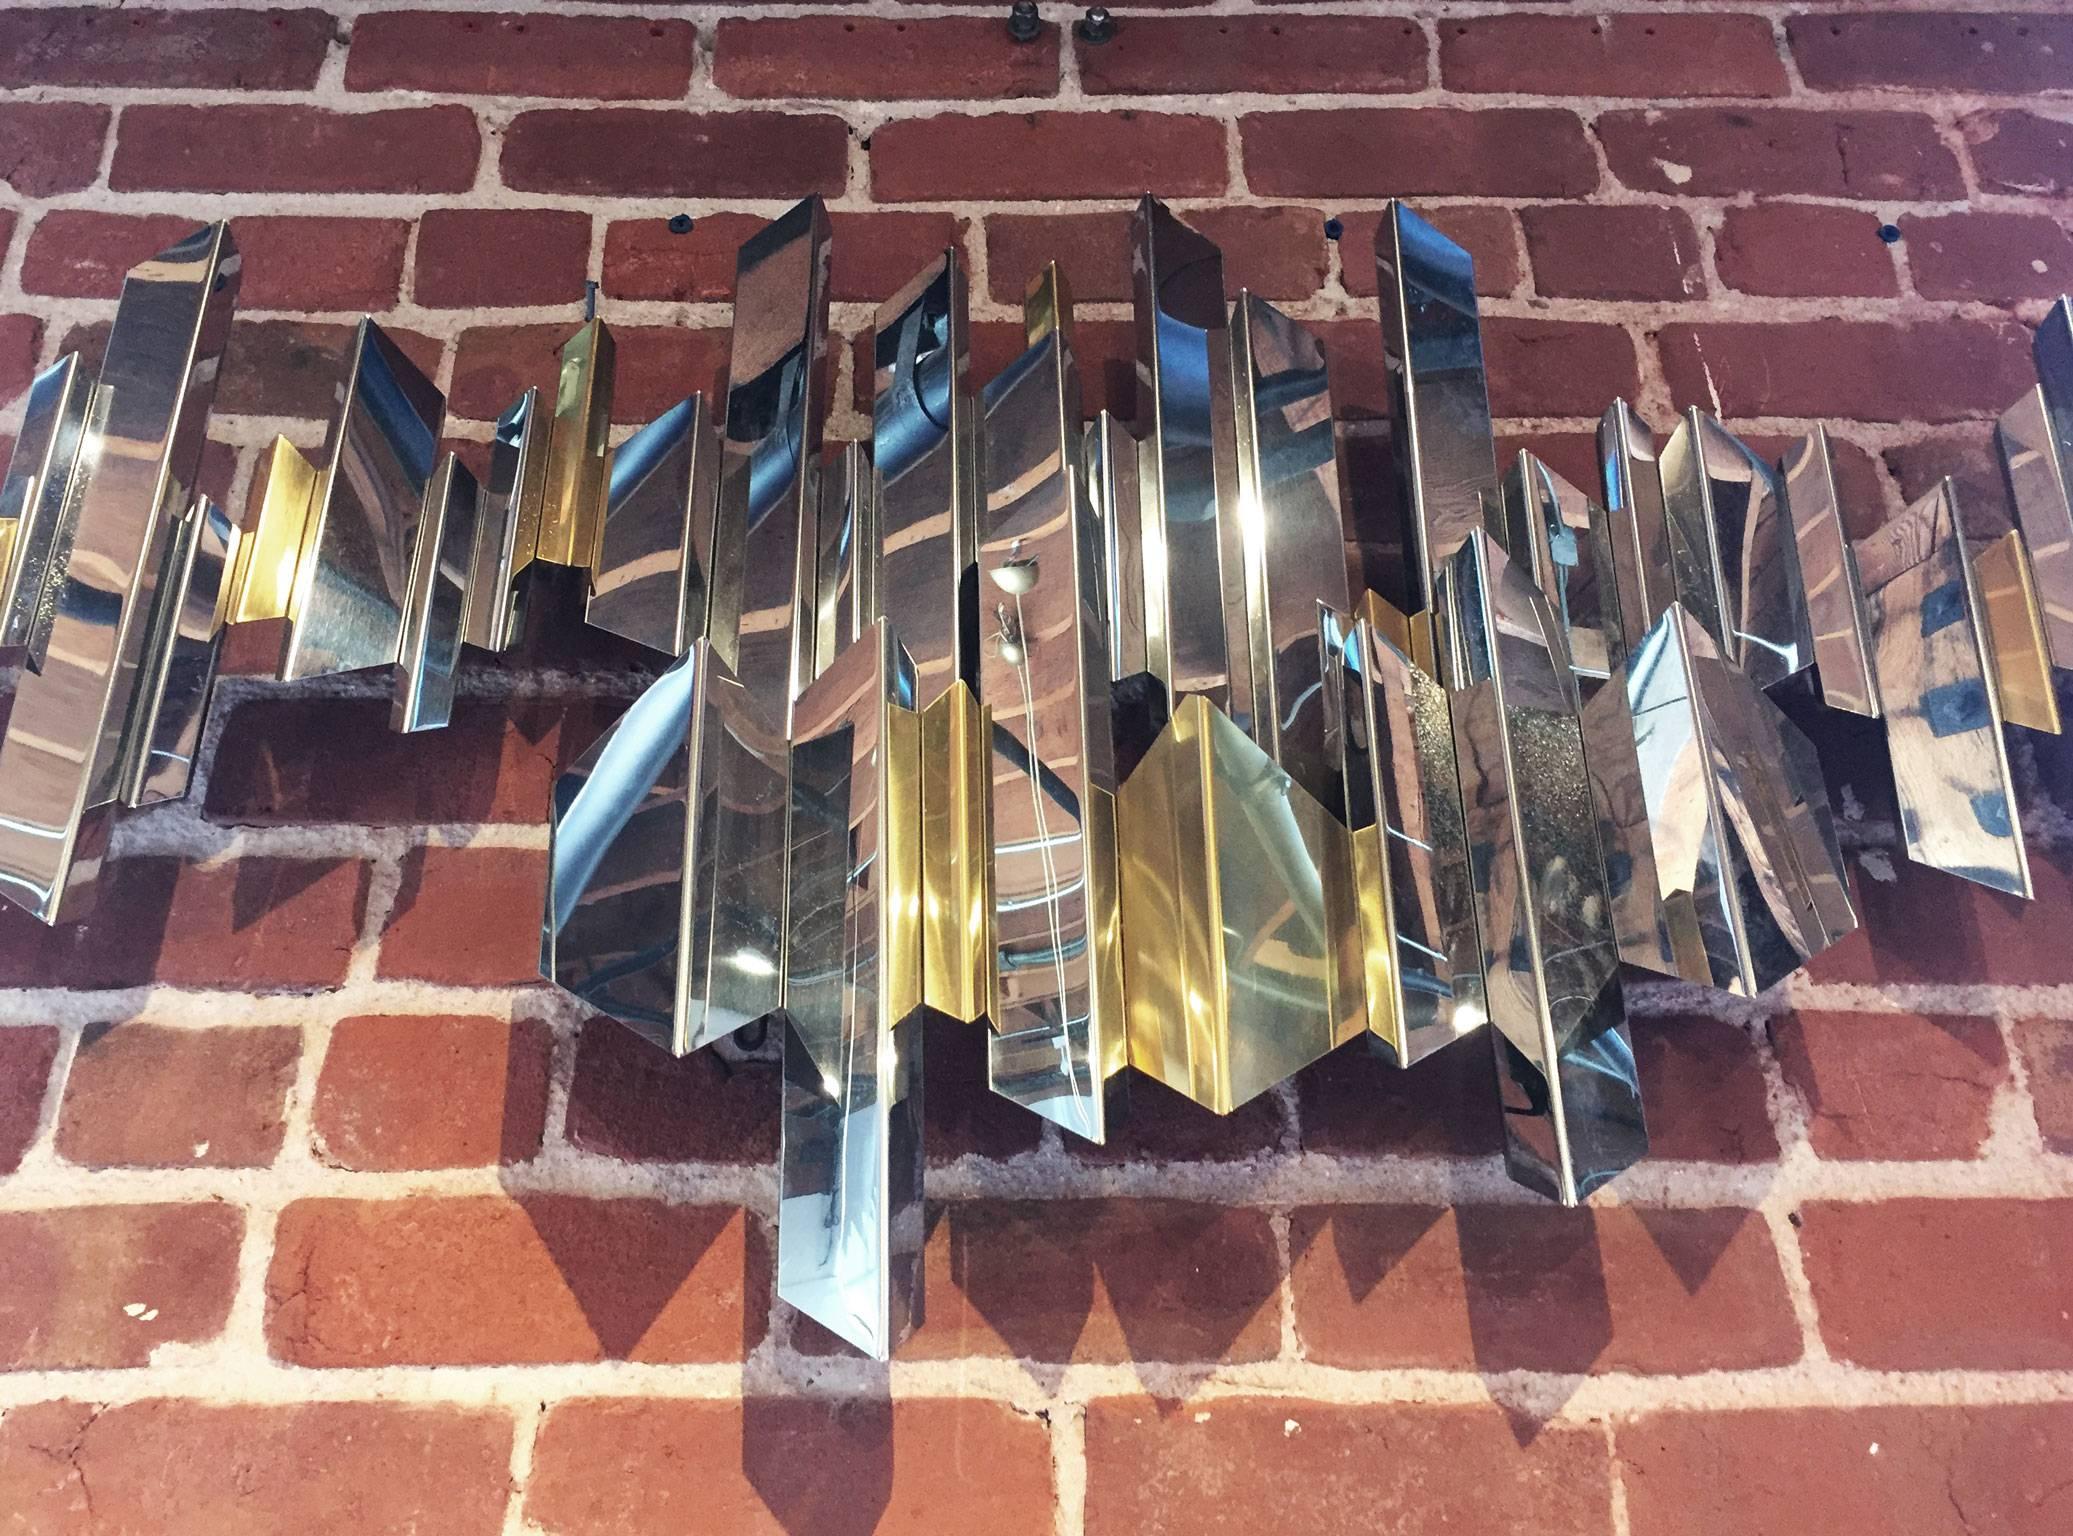 A Chrome And Brass Faceted Wall Sculpture By Curtis Jere.